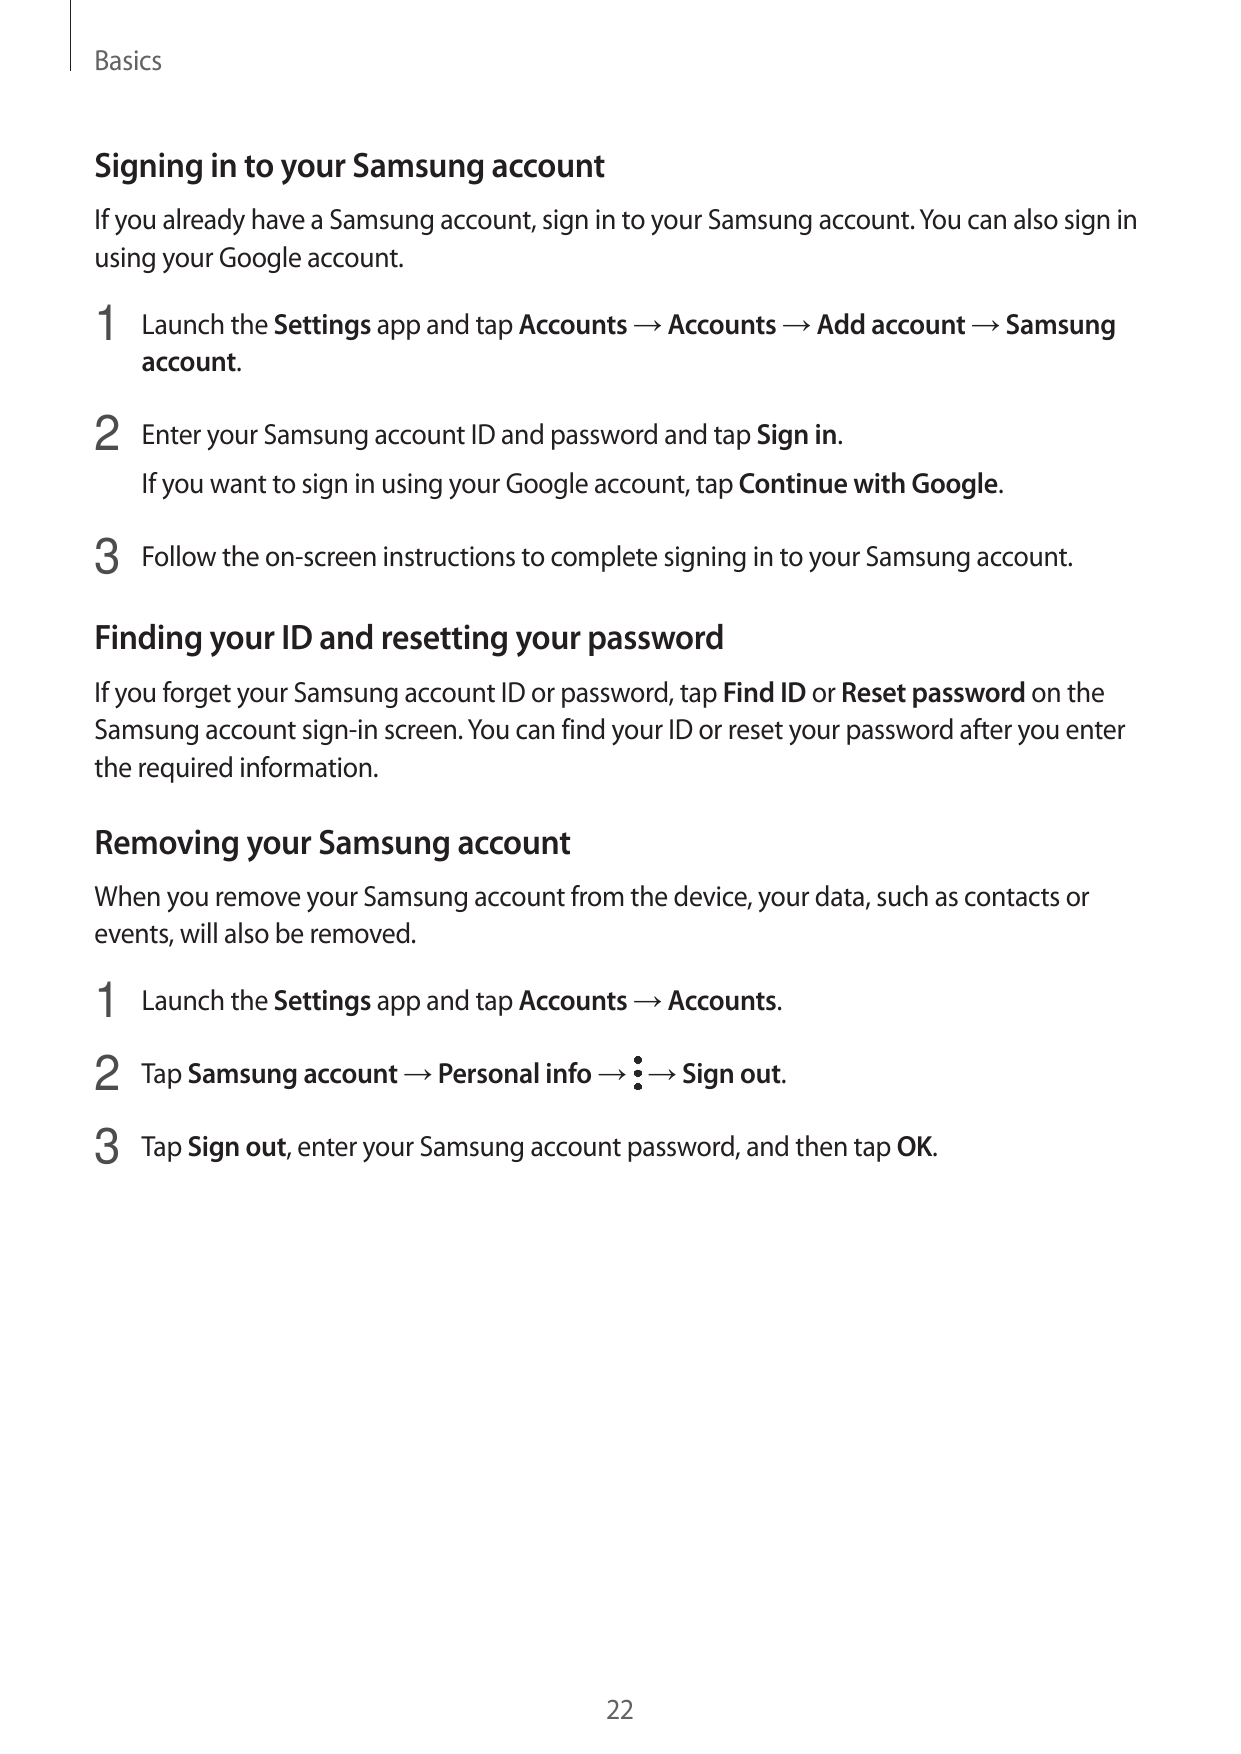 BasicsSigning in to your Samsung accountIf you already have a Samsung account, sign in to your Samsung account. You can also sig